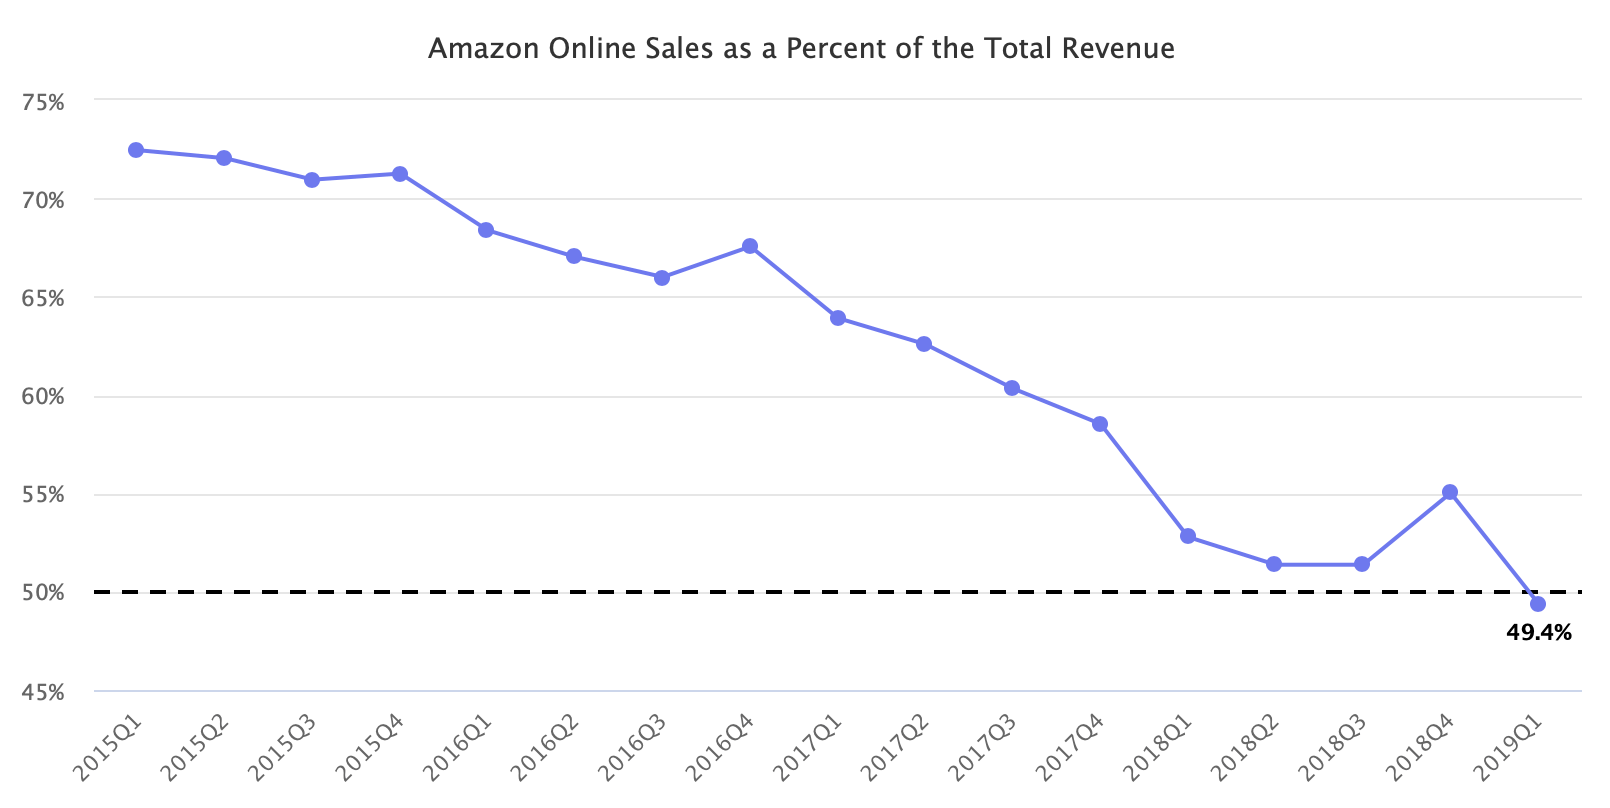 Amazon Online Sales as a Percent of the Total Revenue